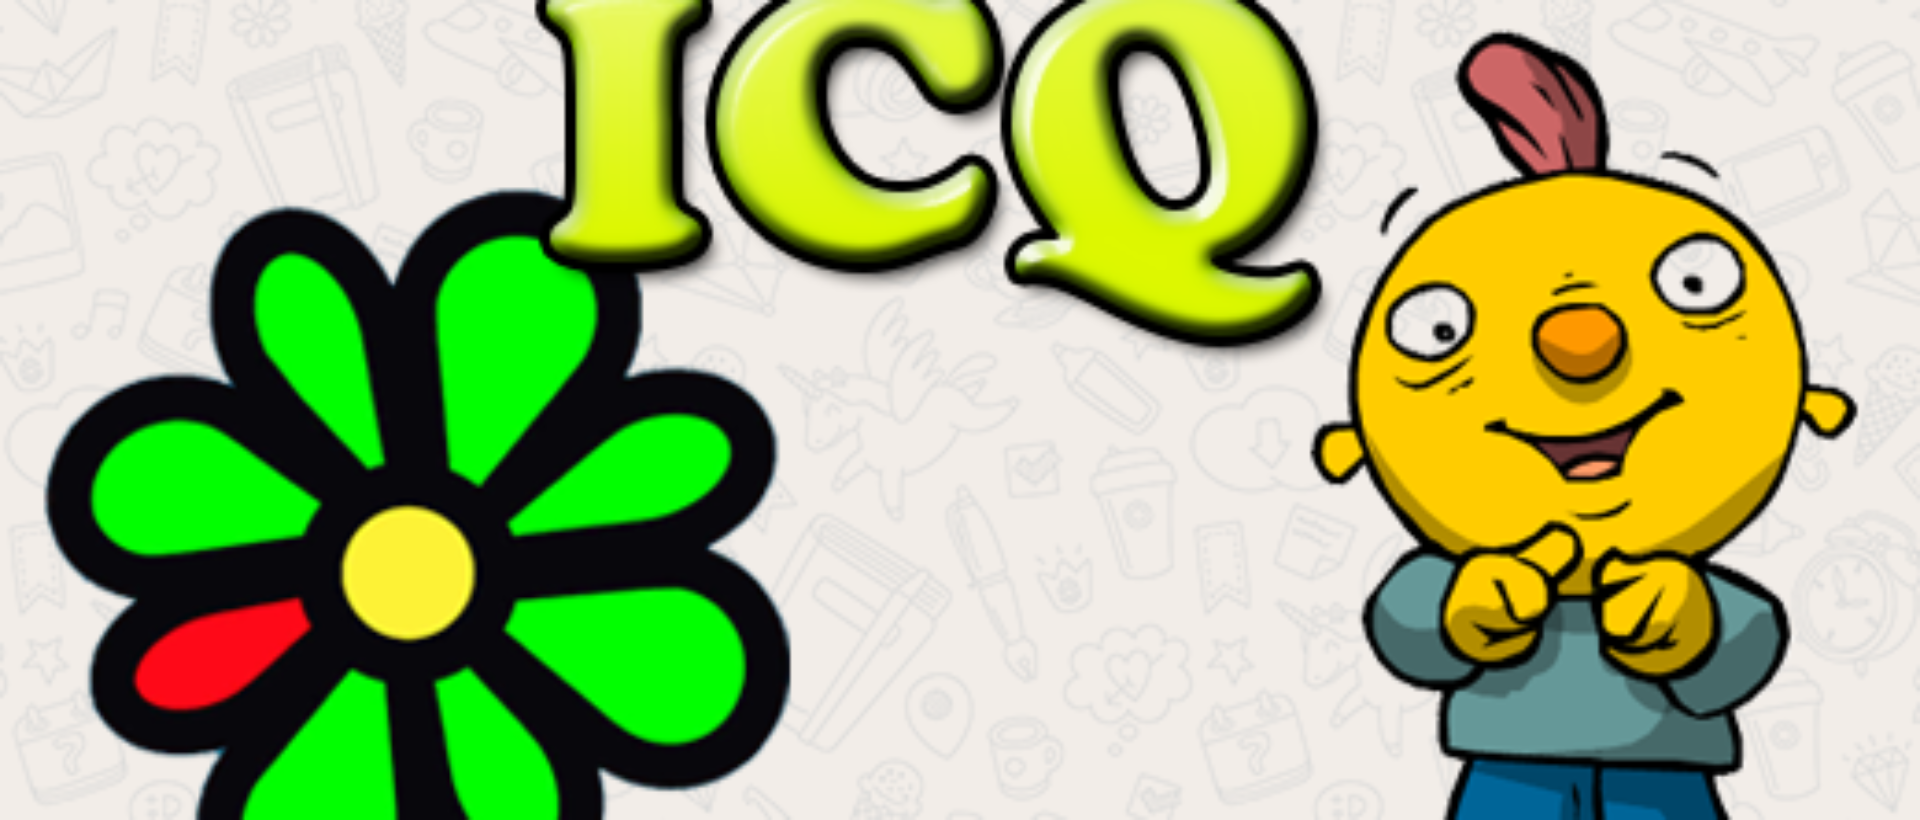 Instant Messaging ICQ